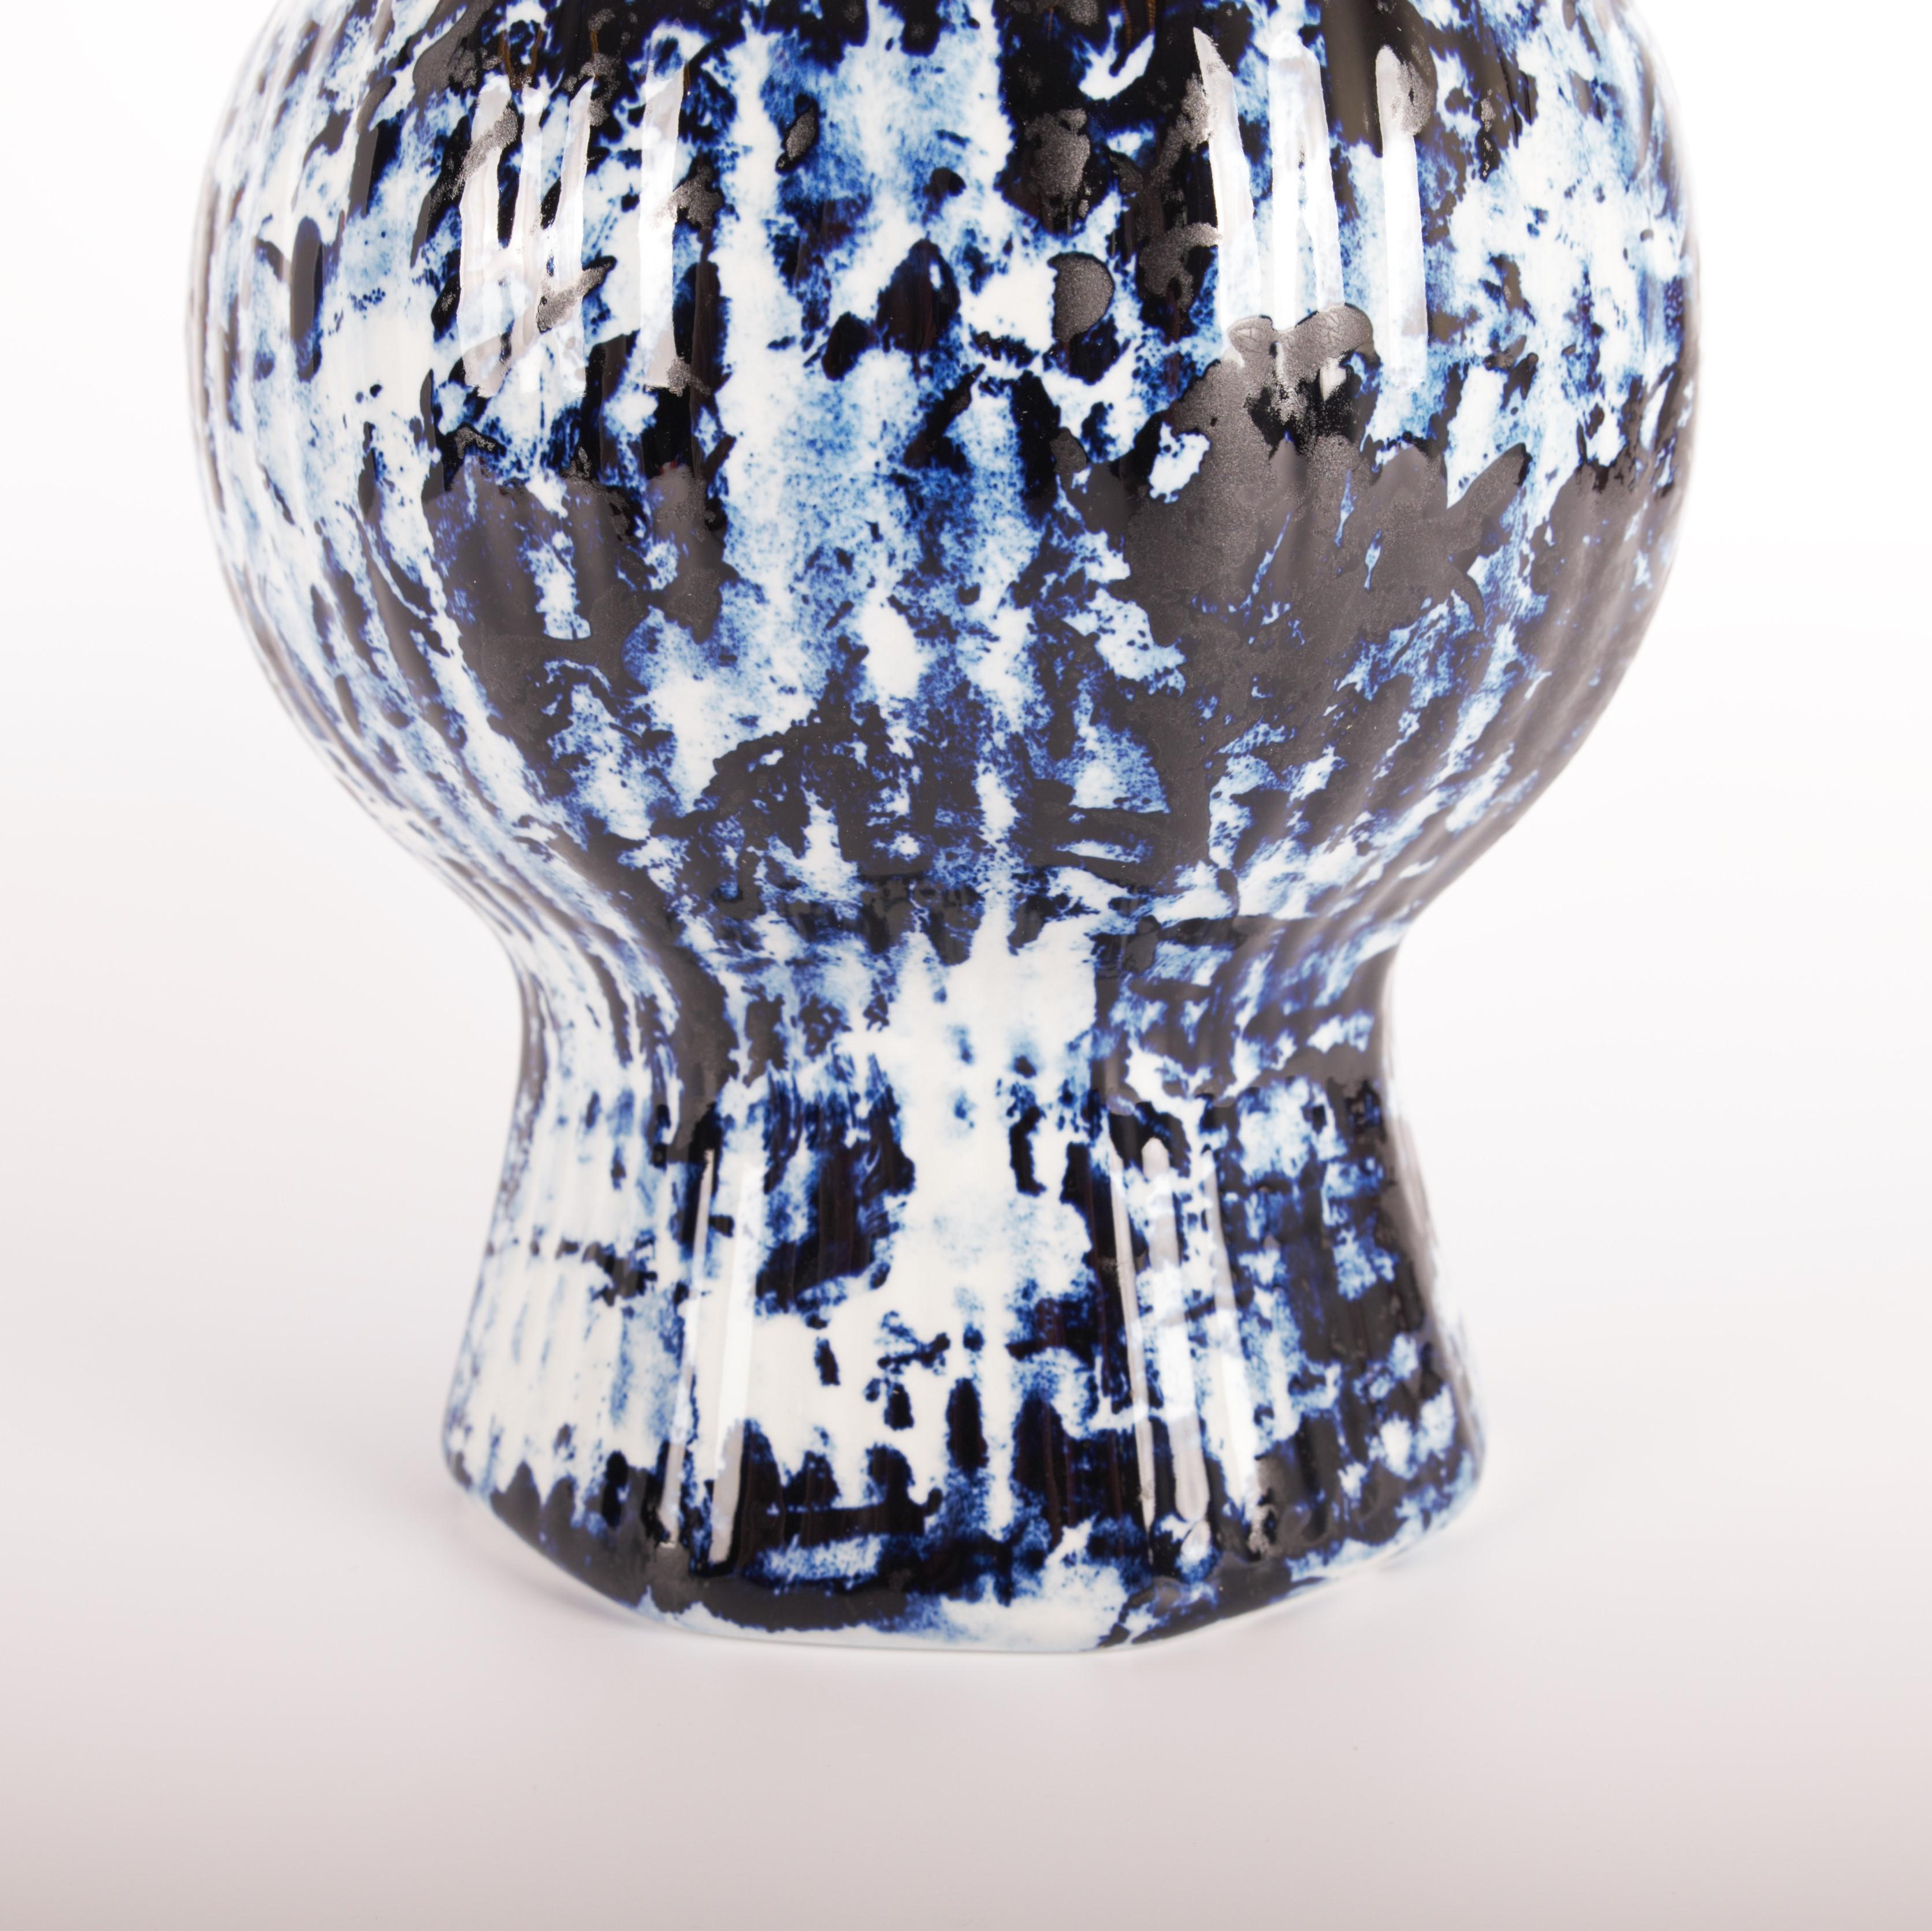 Ceramic Delft Blue Vase with Lid 37cm #2, by Marcel Wanders, Hand Painted, 2006, Unique For Sale